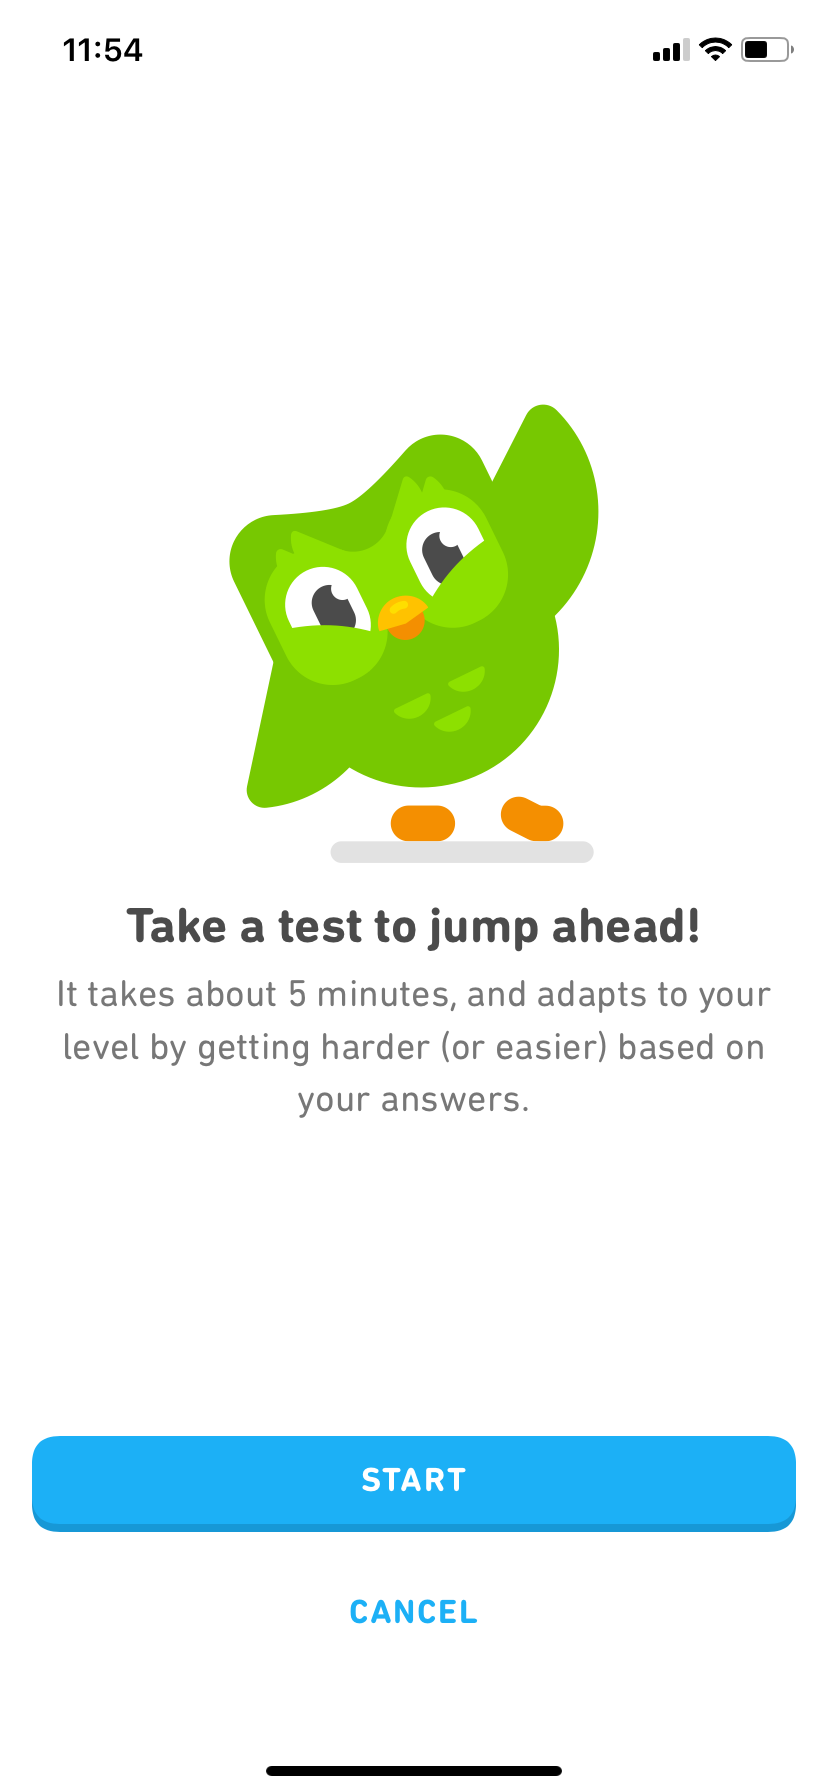 Screenshot of a screen inviting new users to try a first exercise: Take a test to jump ahead! “